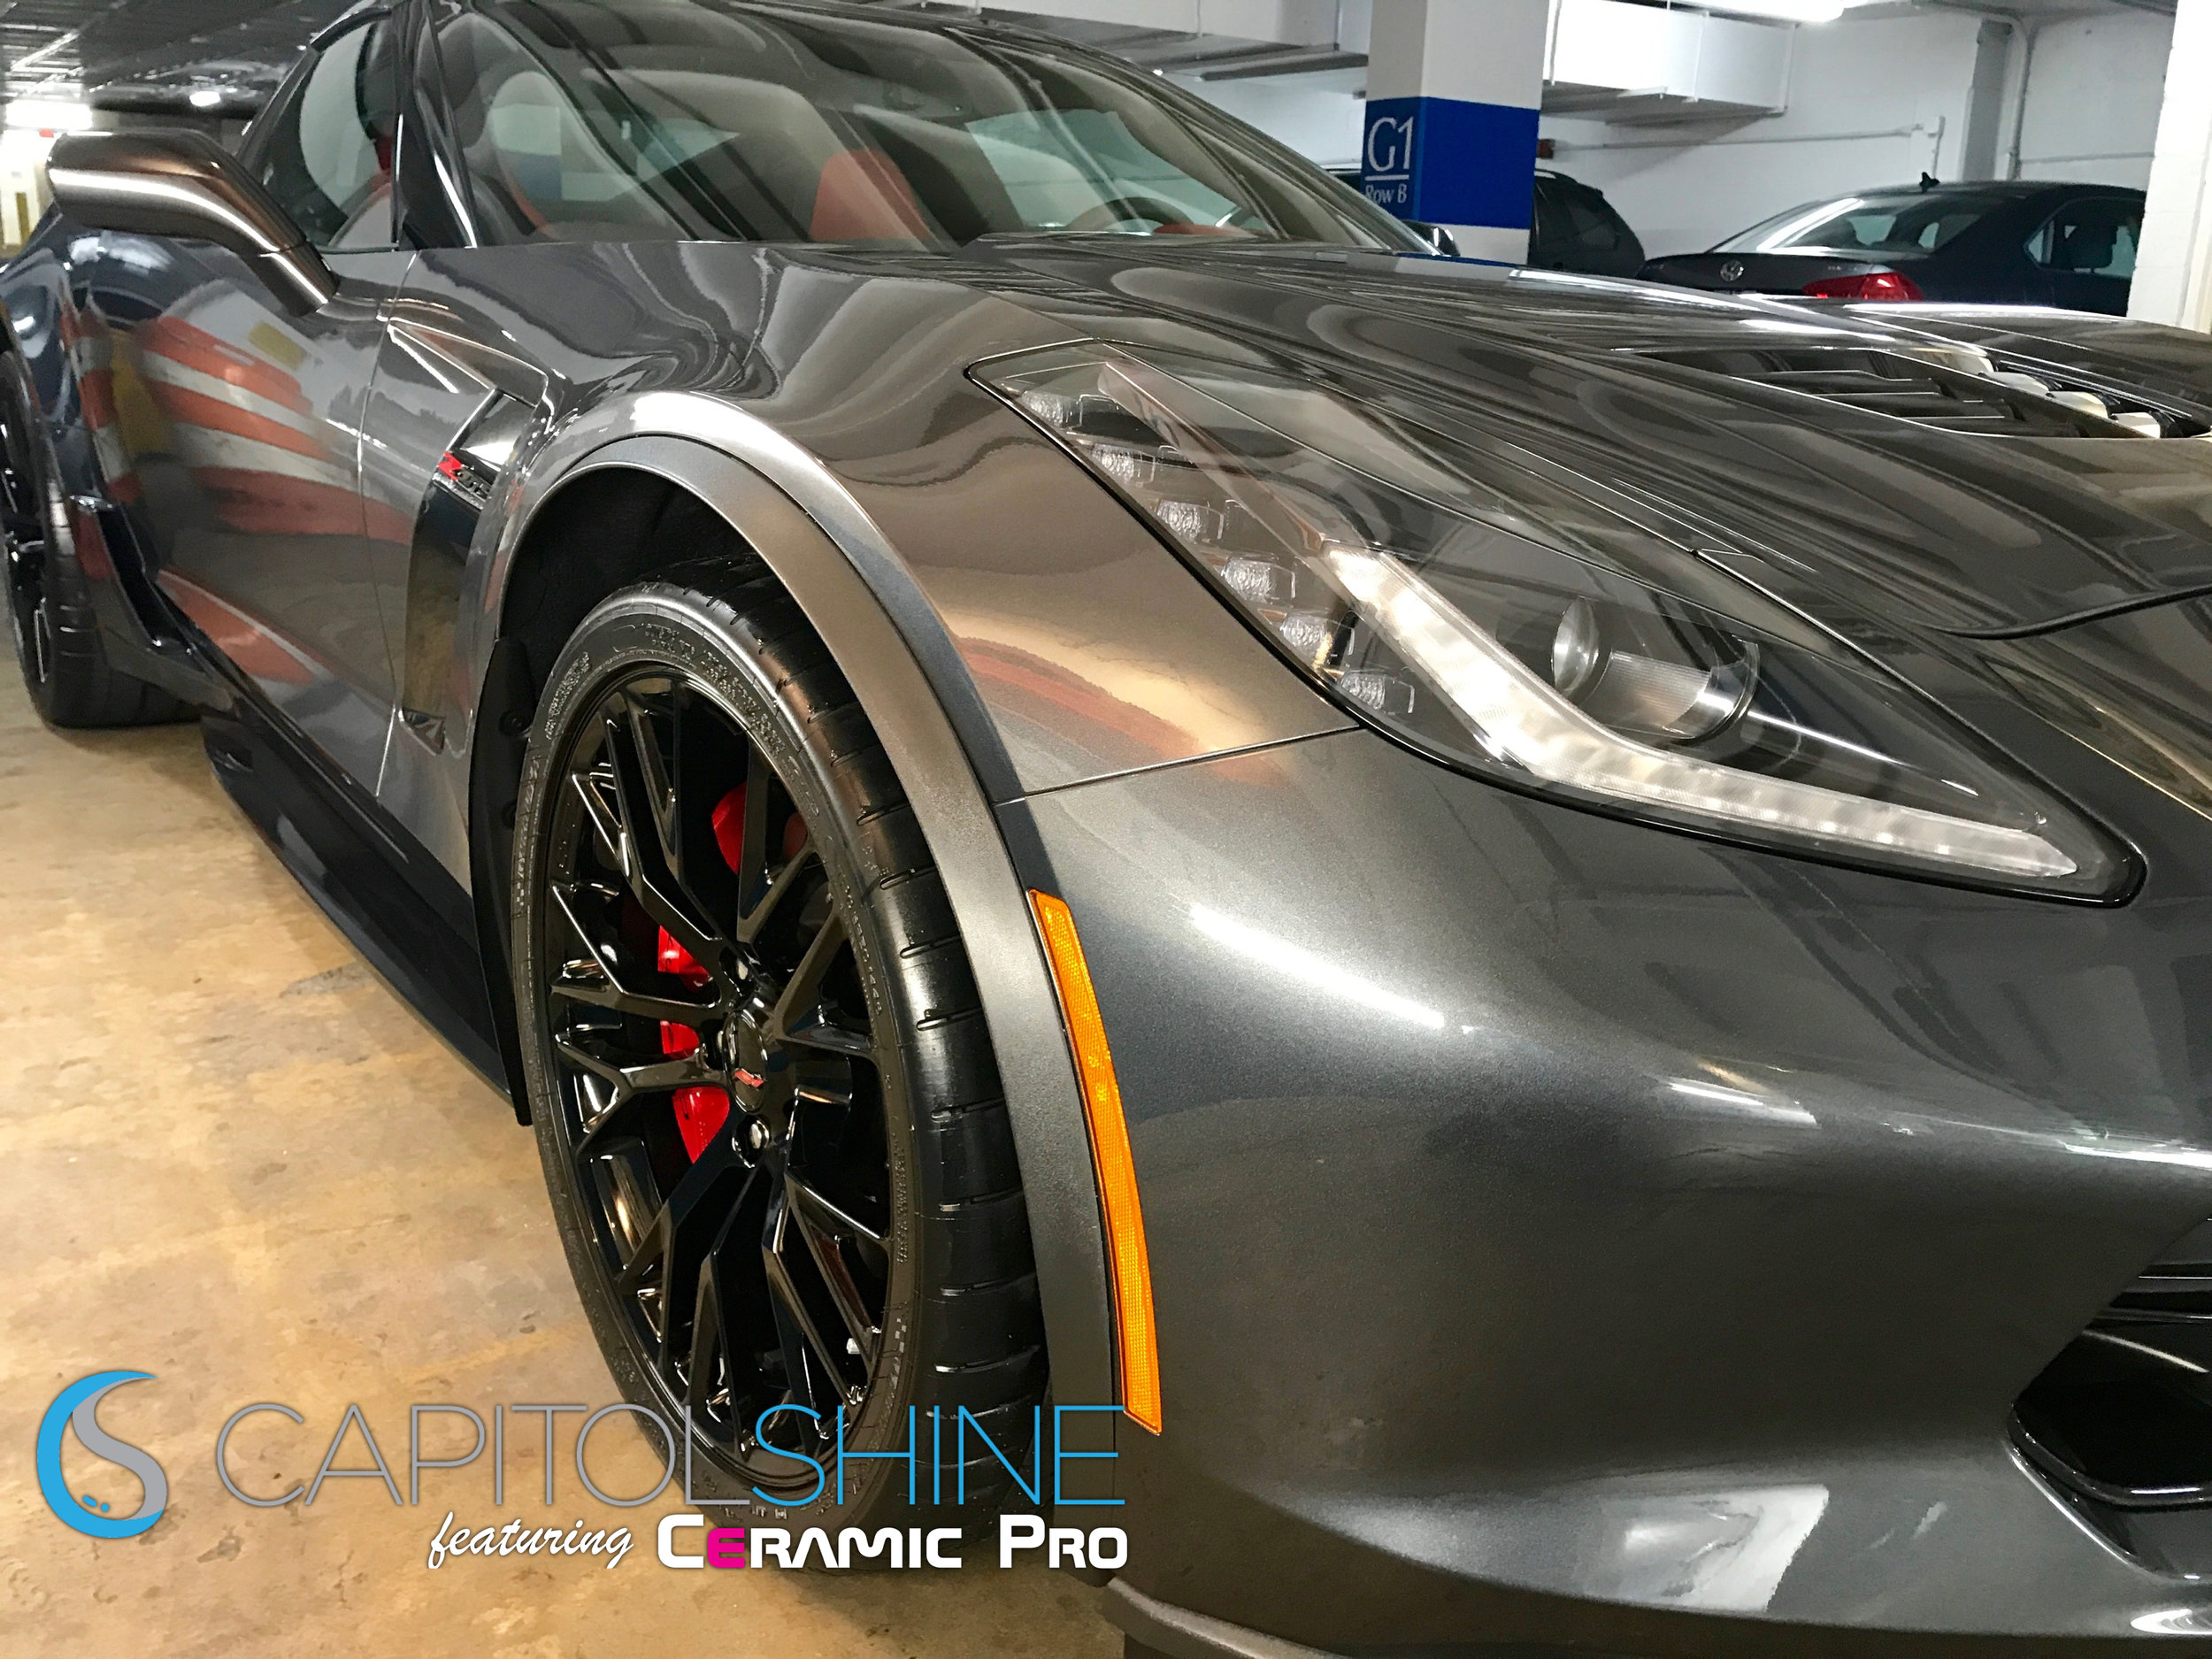 Add A Flat Finish To Your Paint With Vinyl — Capitol Shine Washington DC  Paint Protection Film and Ceramic Coatings